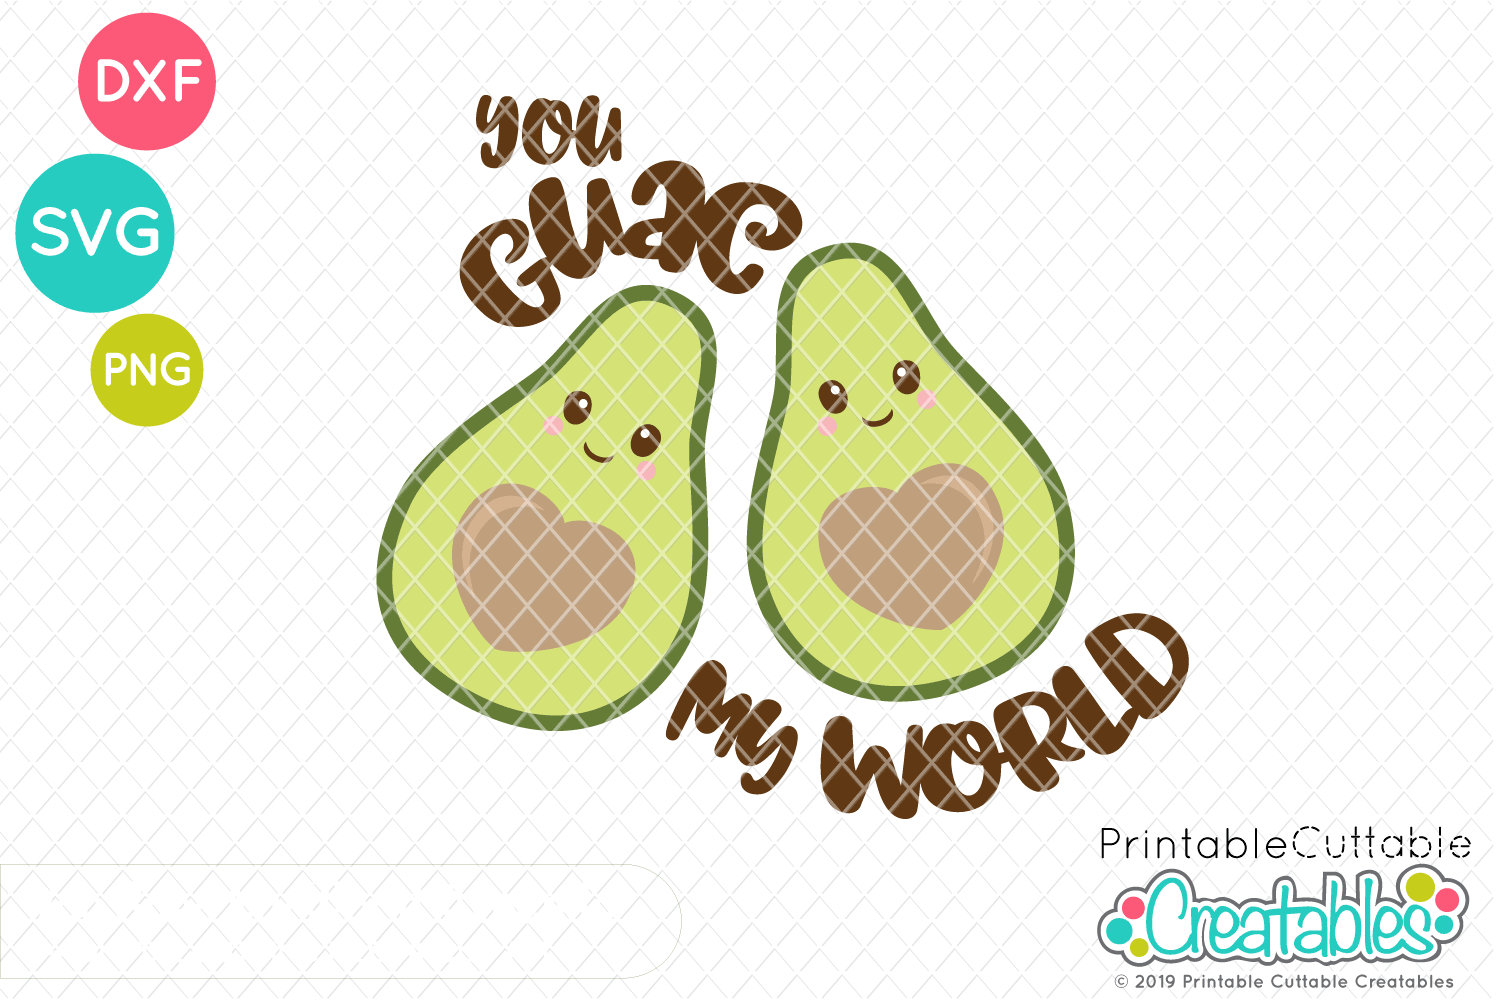 Beauty Comes In All Shapes & Sizes [Avocado] - Tumbler